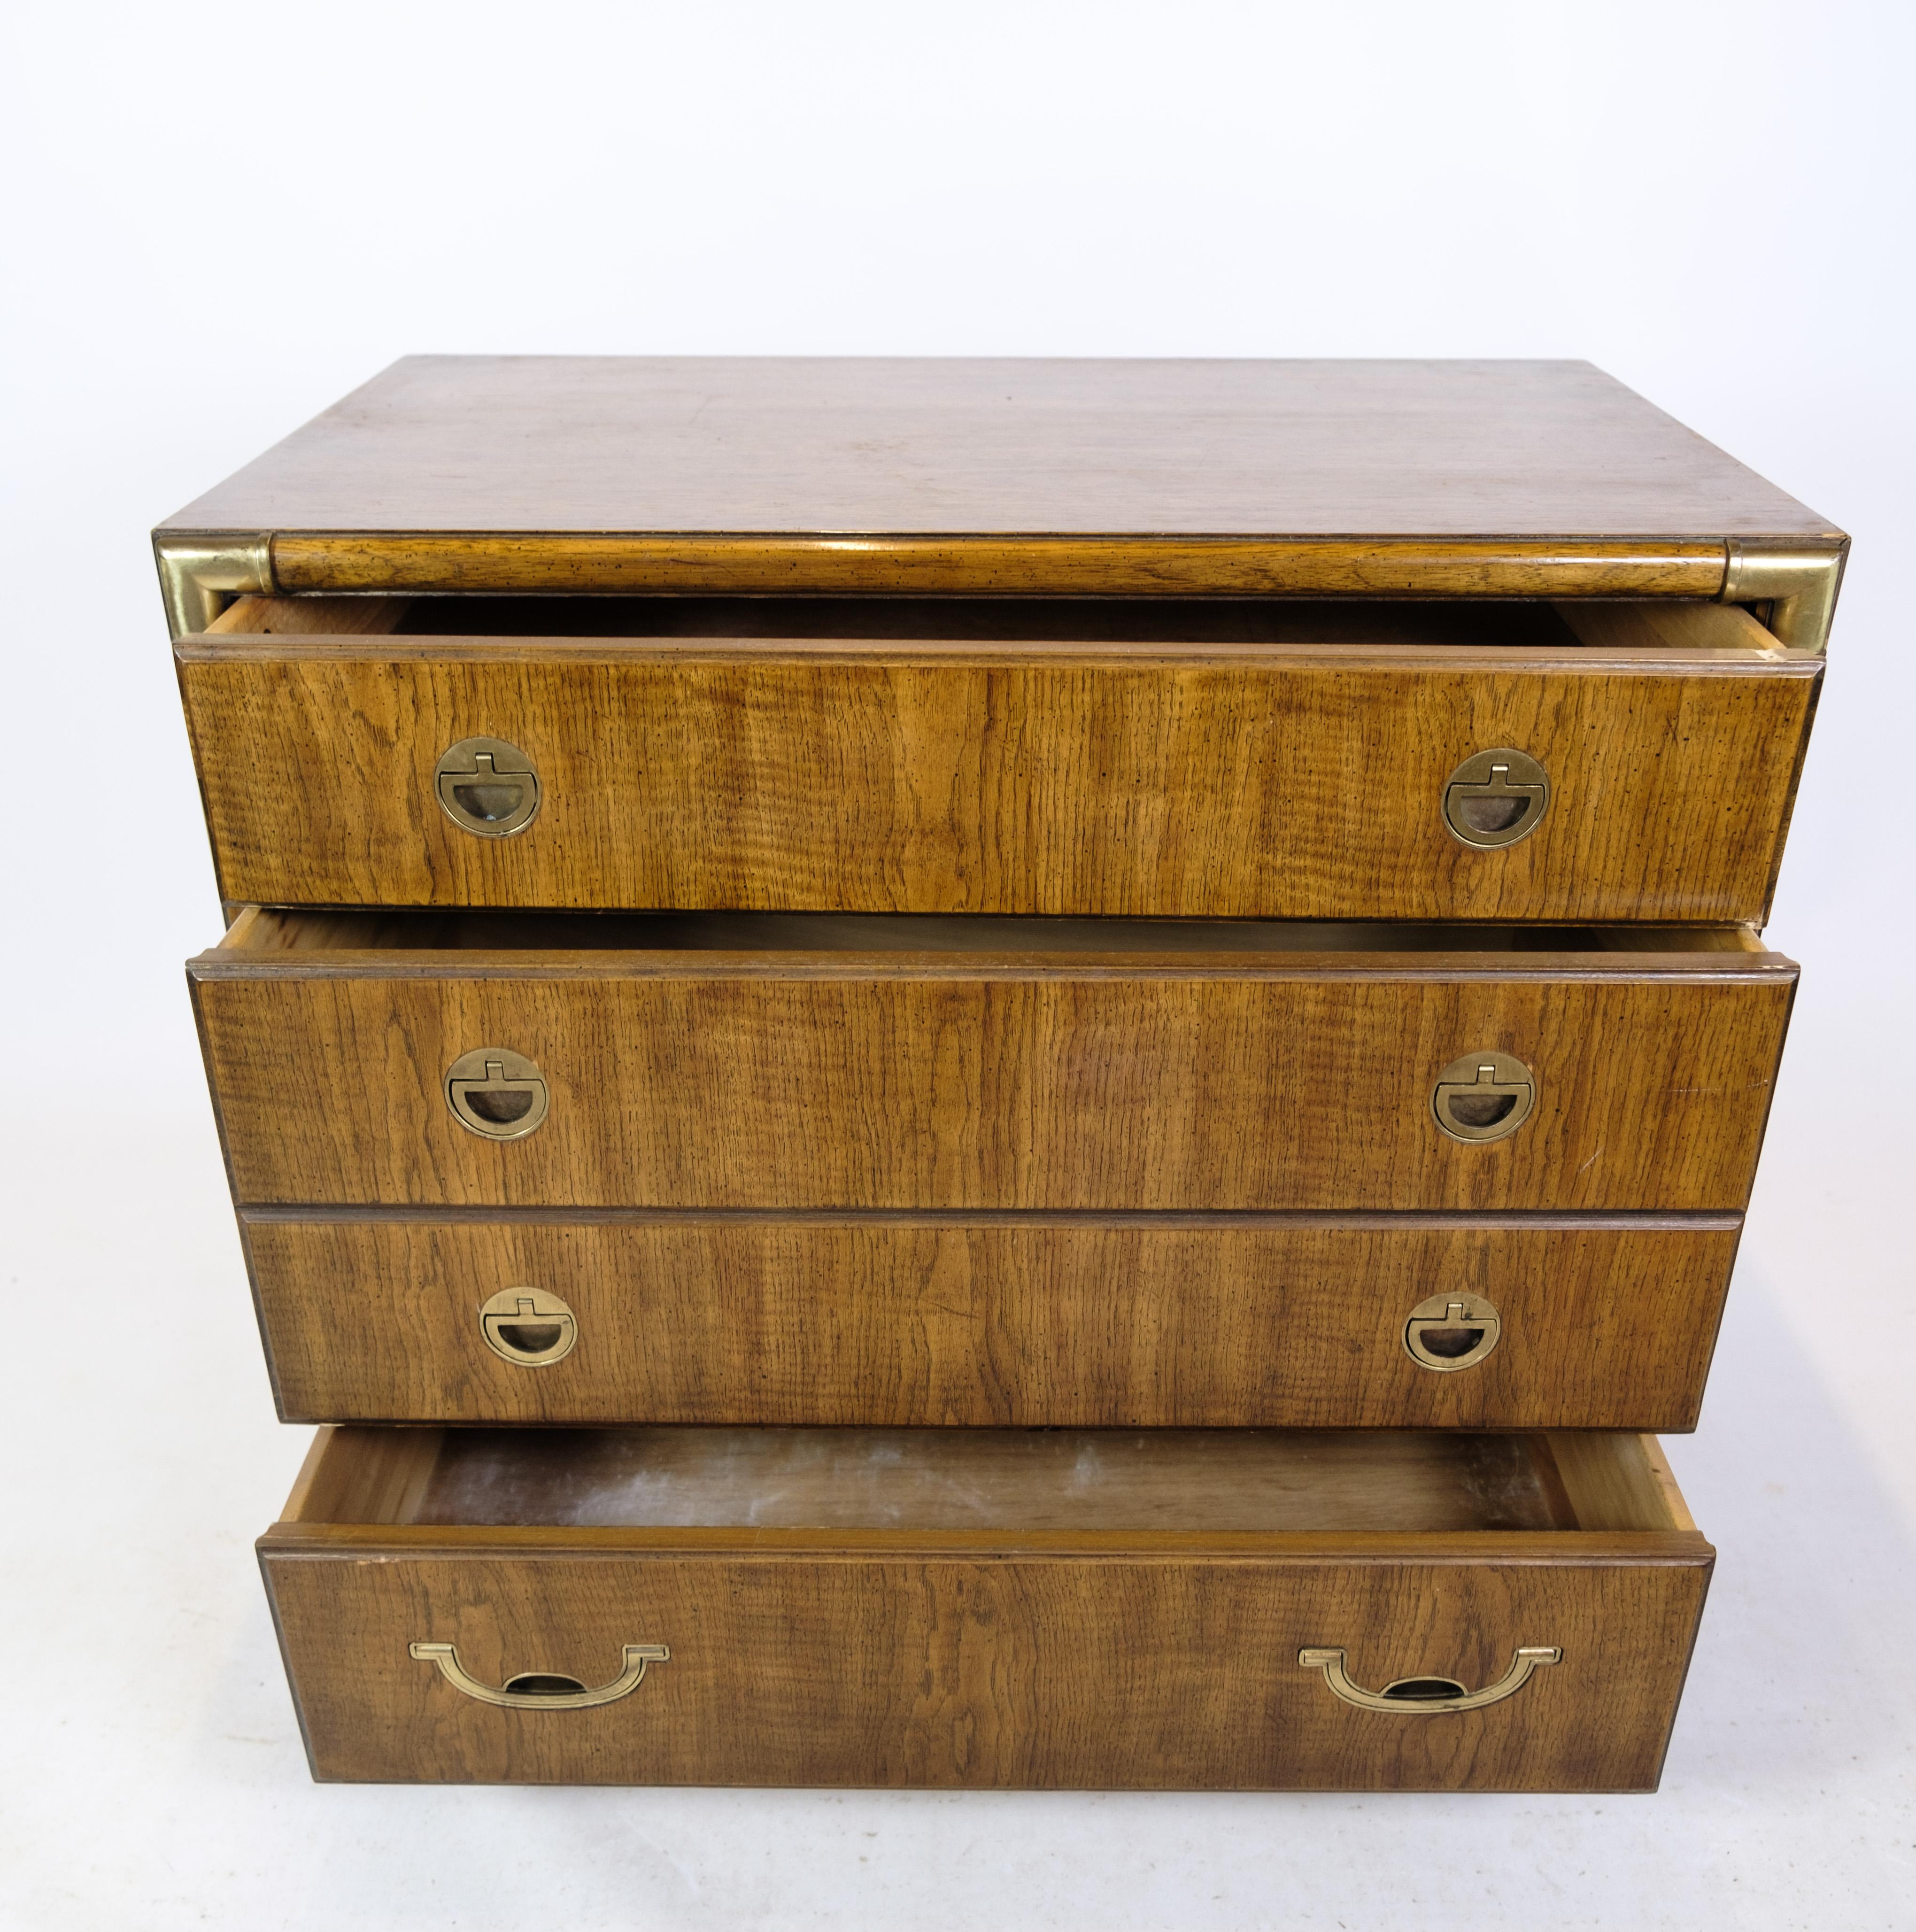 American chest of drawers with 4 drawers and brass handles from about 1920s made by Drexel furniture company, North Carolina
Measurements in cm: H:76 W:80 D:48.5